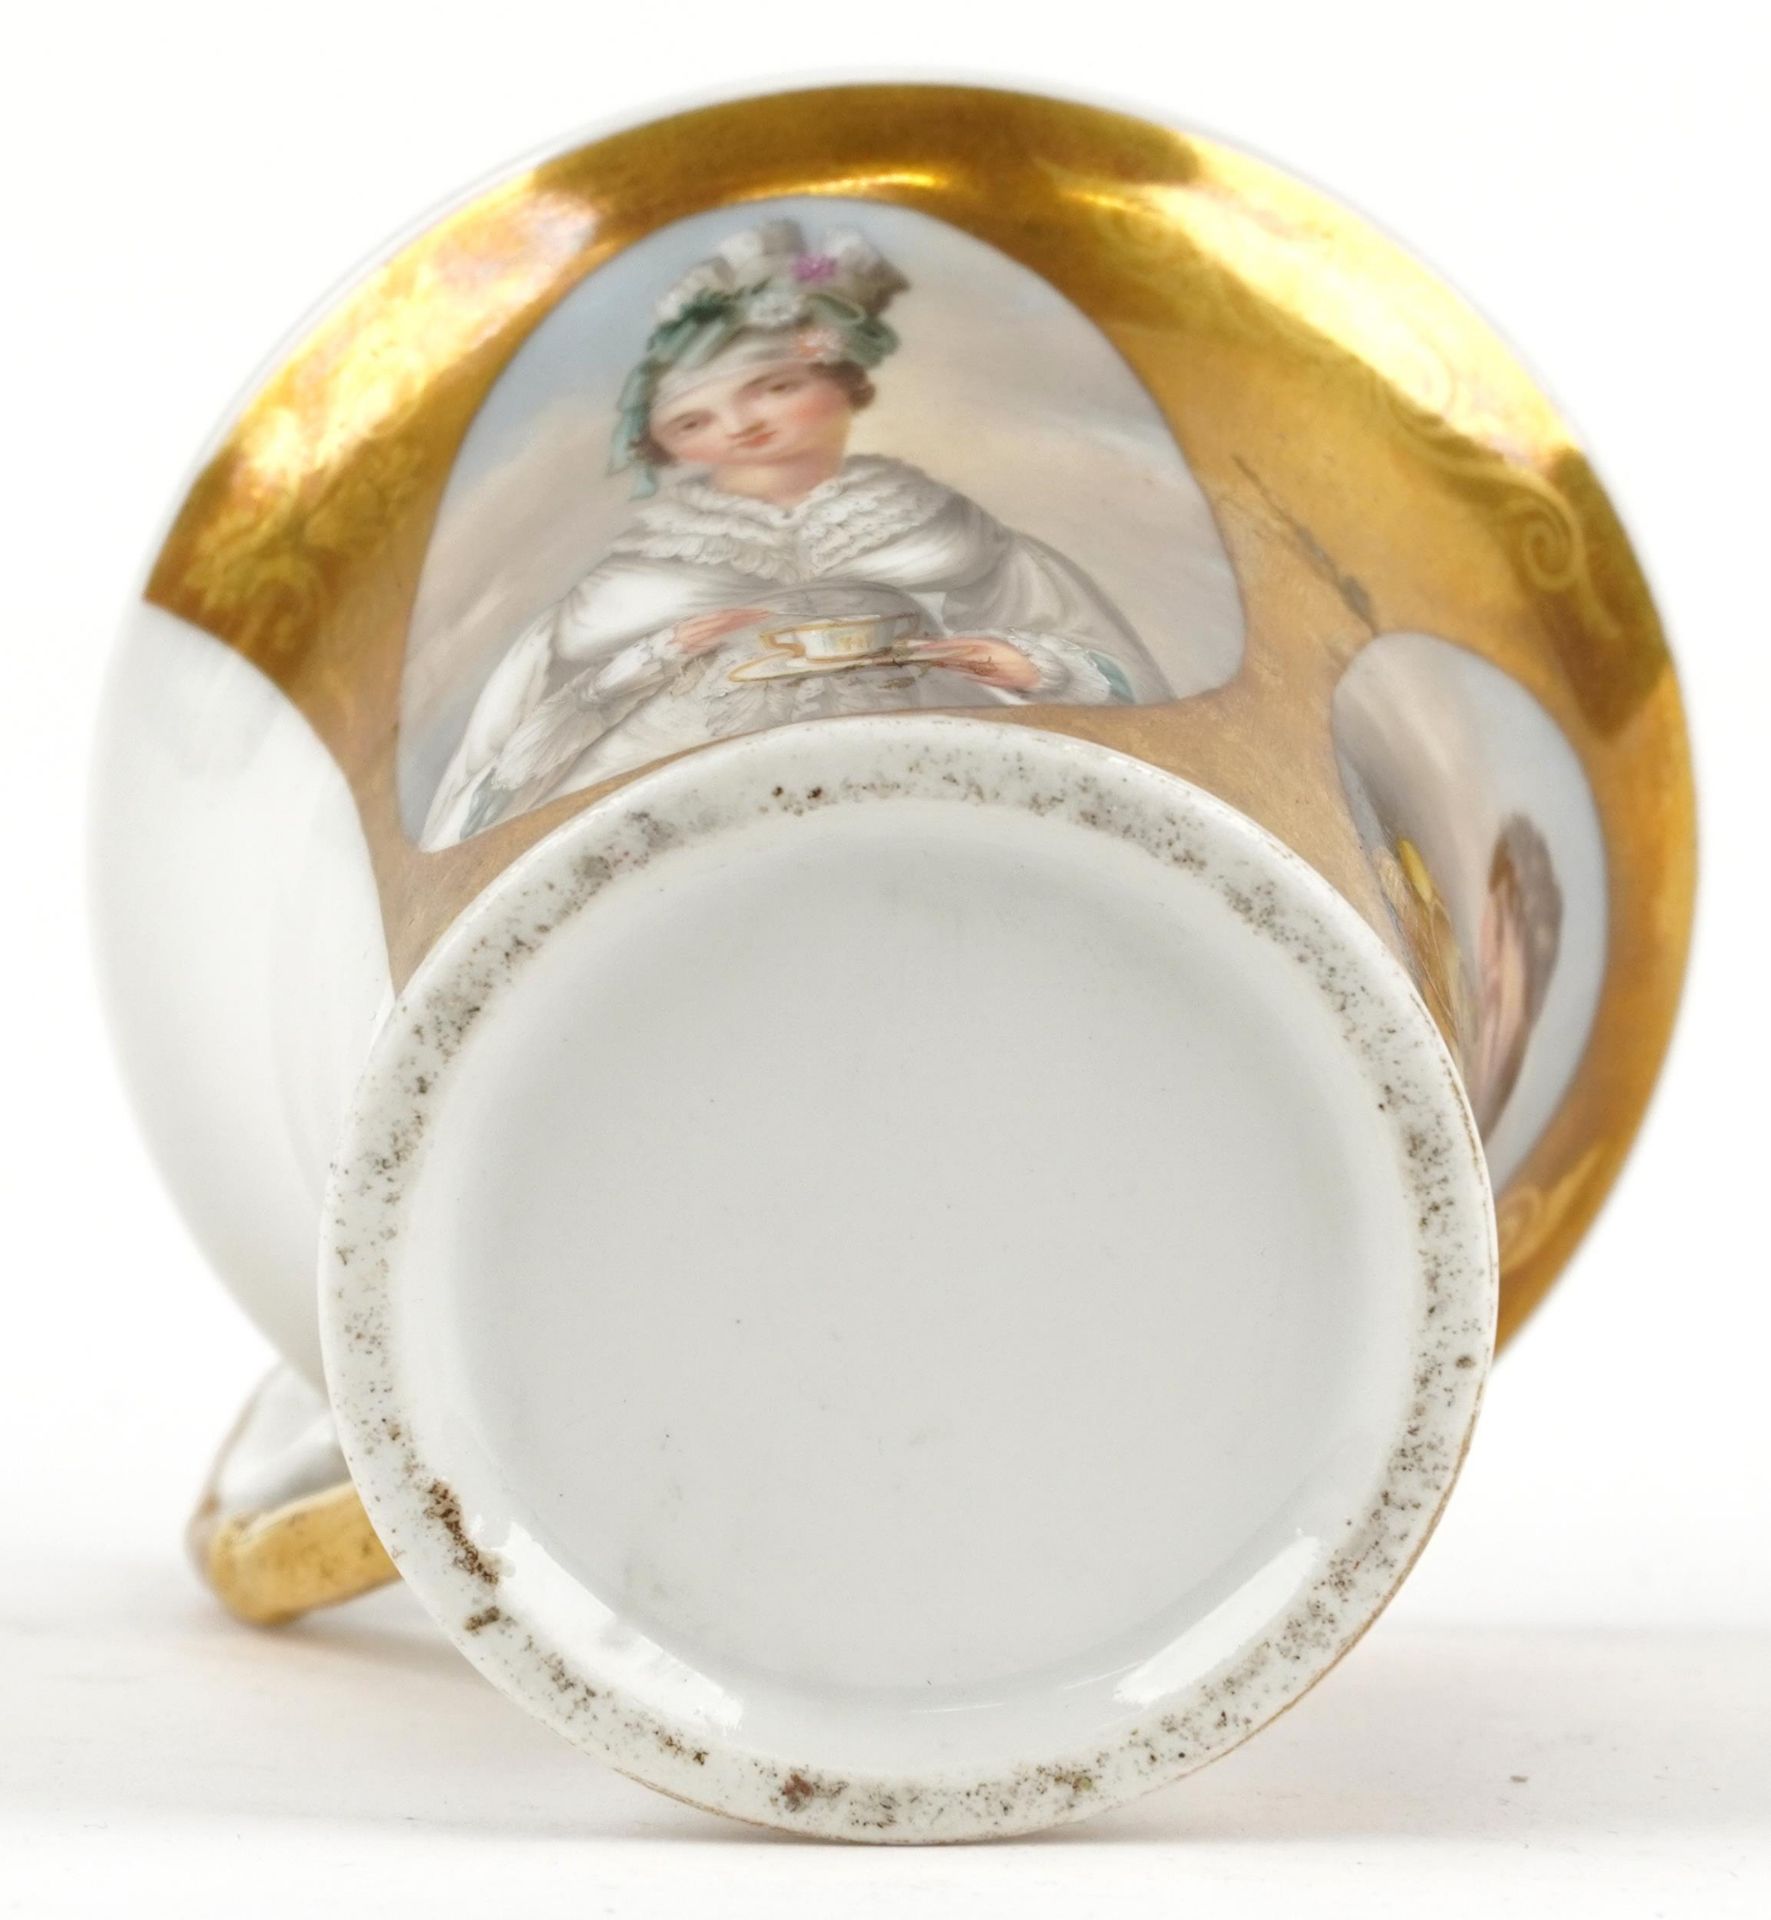 Early 19th century European porcelain cup hand painted with oval portraits of young Queen Victoria - Image 5 of 5